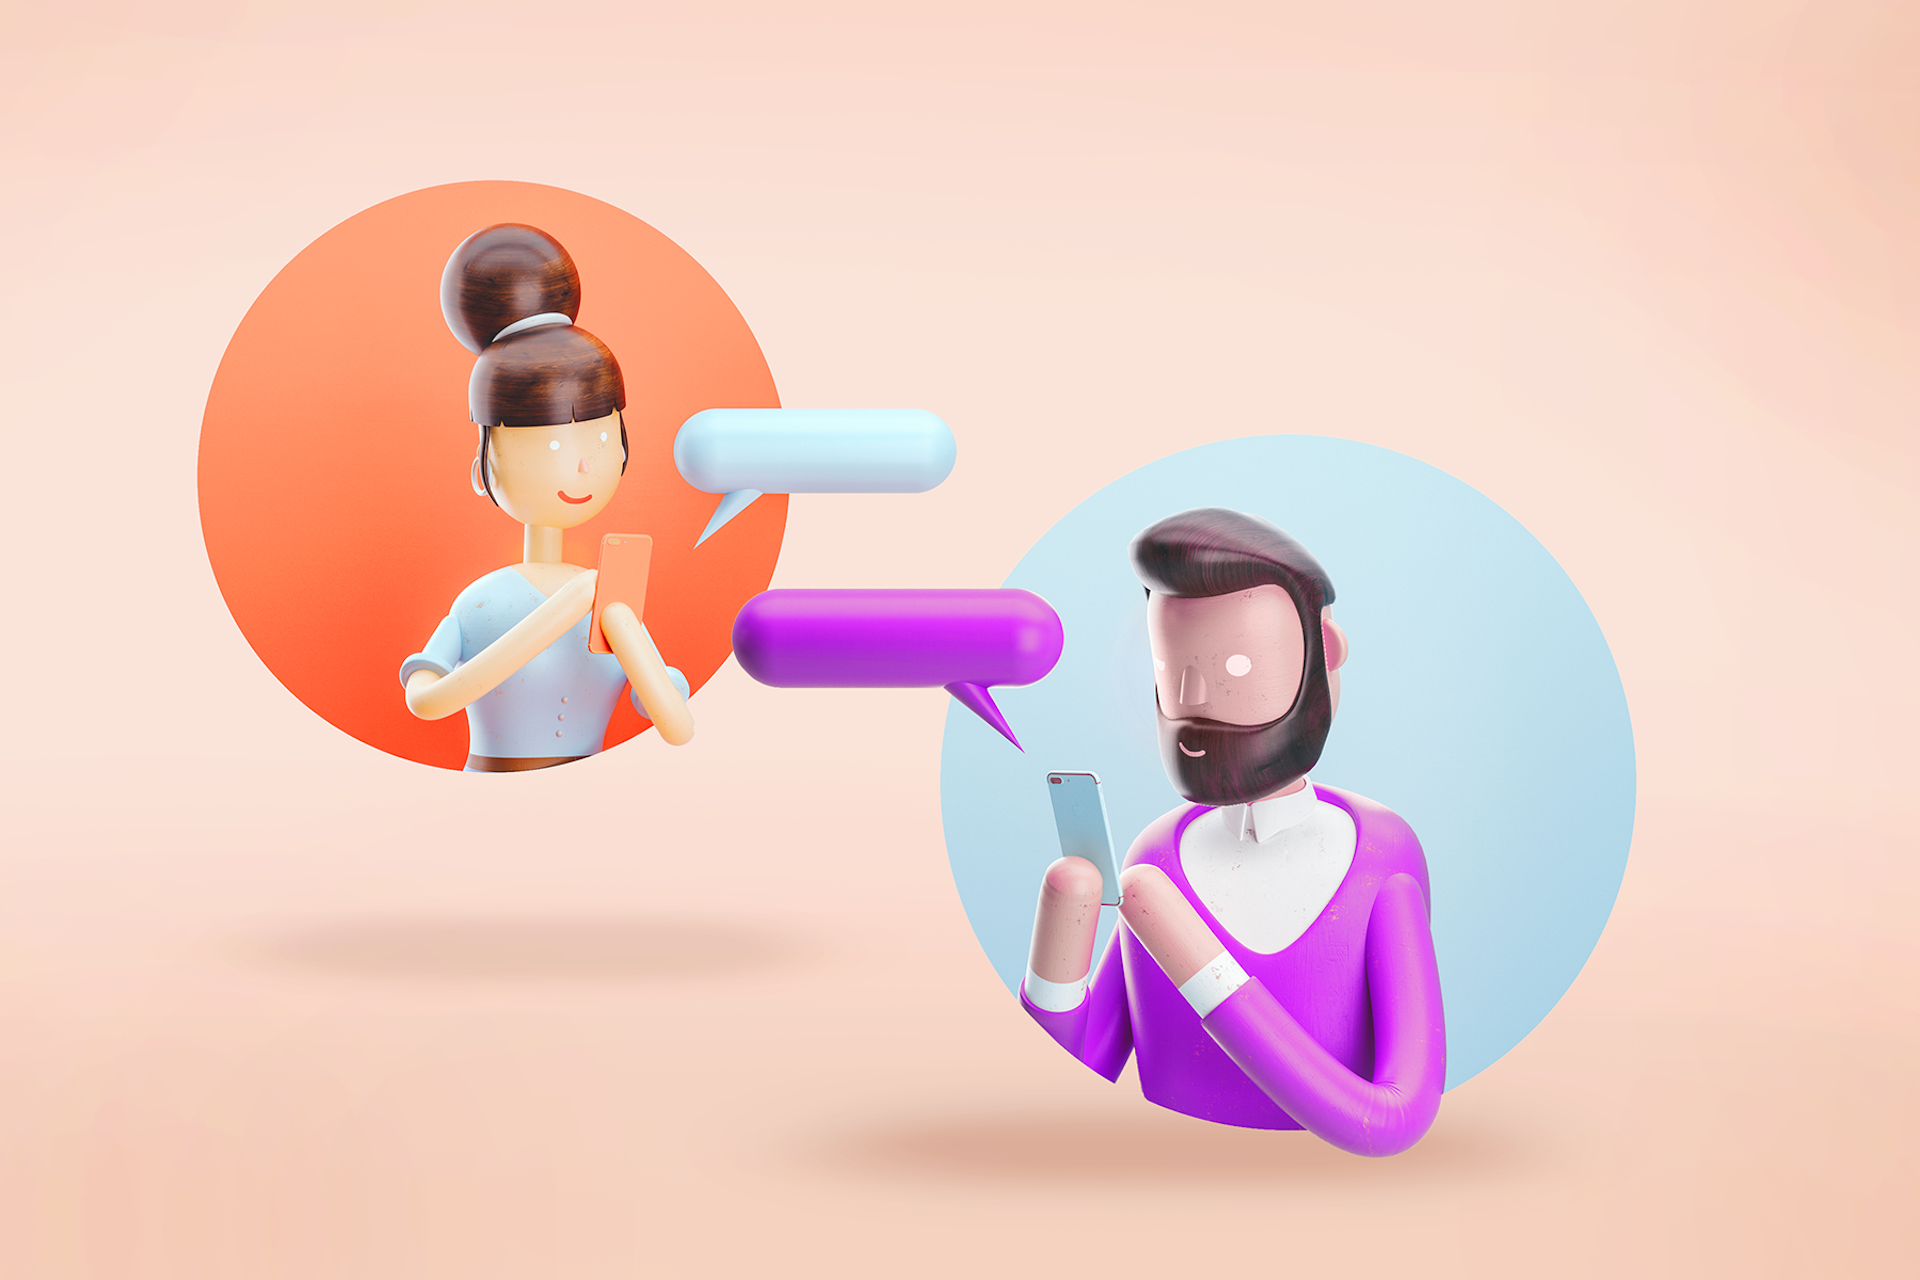 An illustration showing a man and a woman texting back and forth. The woman is on the left, inside an orange bubble, the man is on the right inside a blue bubble. They each are holding a phone with a speech bubble symbol. Word-of-mouth marketing blog post.